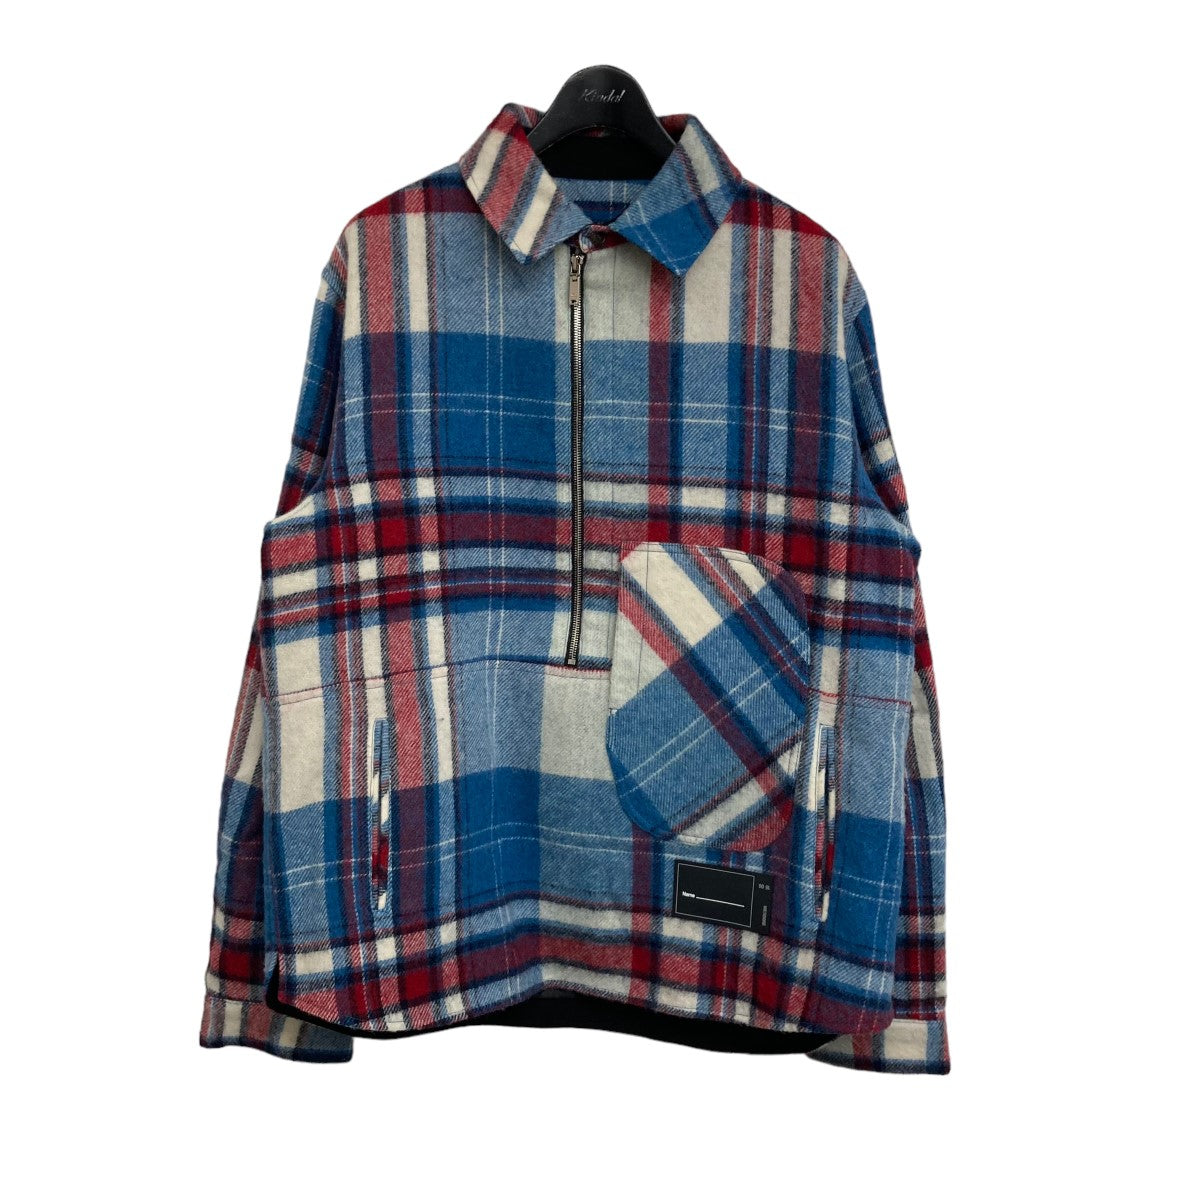 WE11DONE(ウェルダン) 「Blue WD Check Anorak Wool Shirt」 シャツ